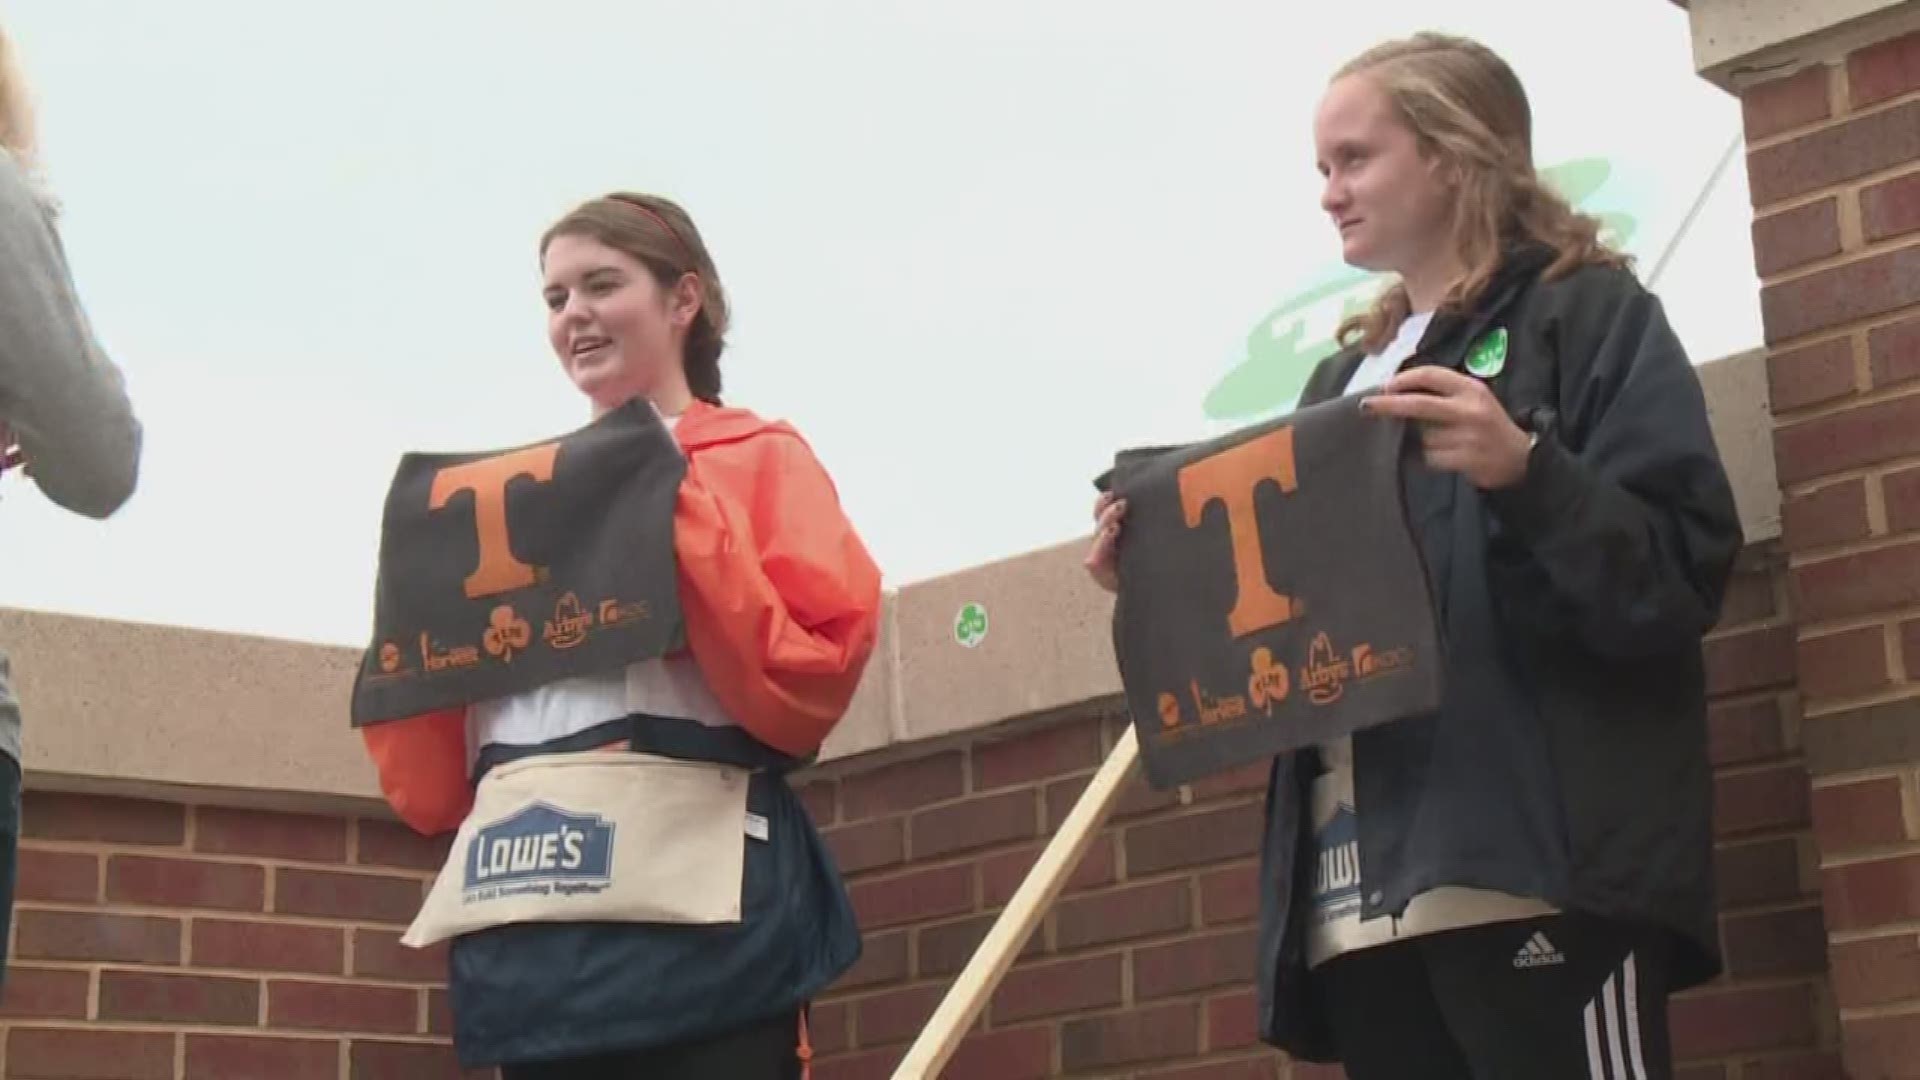 10News Anchor Abby Ham is joined by Elaine Streno to talk about the Power T towel and the fundraising effort to honor Kerin and feed the hungry across East Tennessee.